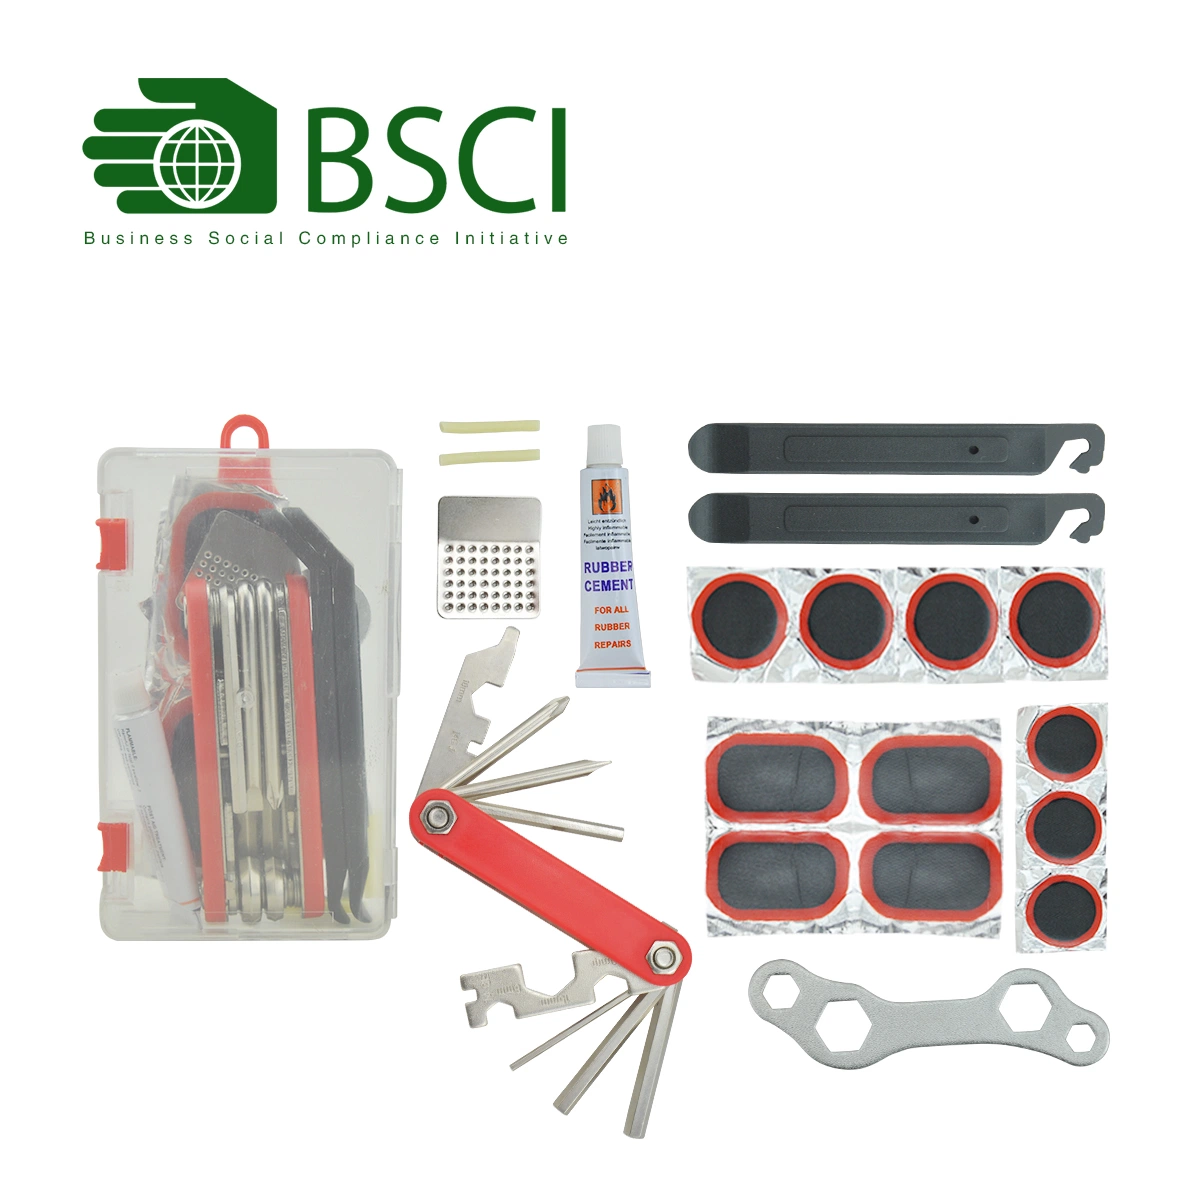 Cold Patch Repair Kit 1set Bicycle Chain Toolbicycle Tool Setbicycle Multi Toolbicycle Tool Sets Bike Tire Toolbikes Tools Bicycle Tool Bag